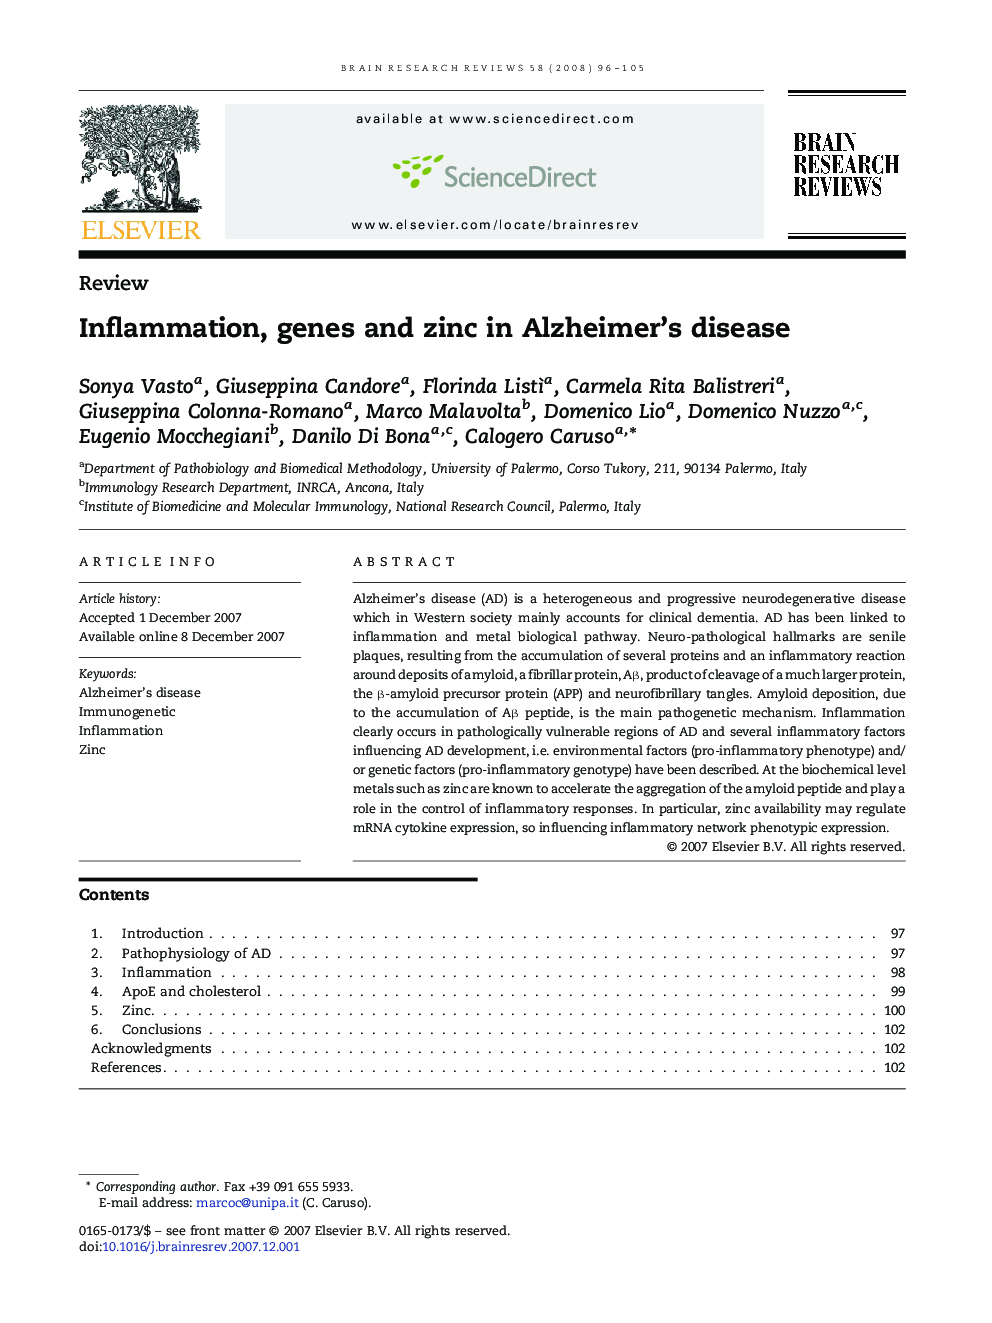 Inflammation, genes and zinc in Alzheimer's disease